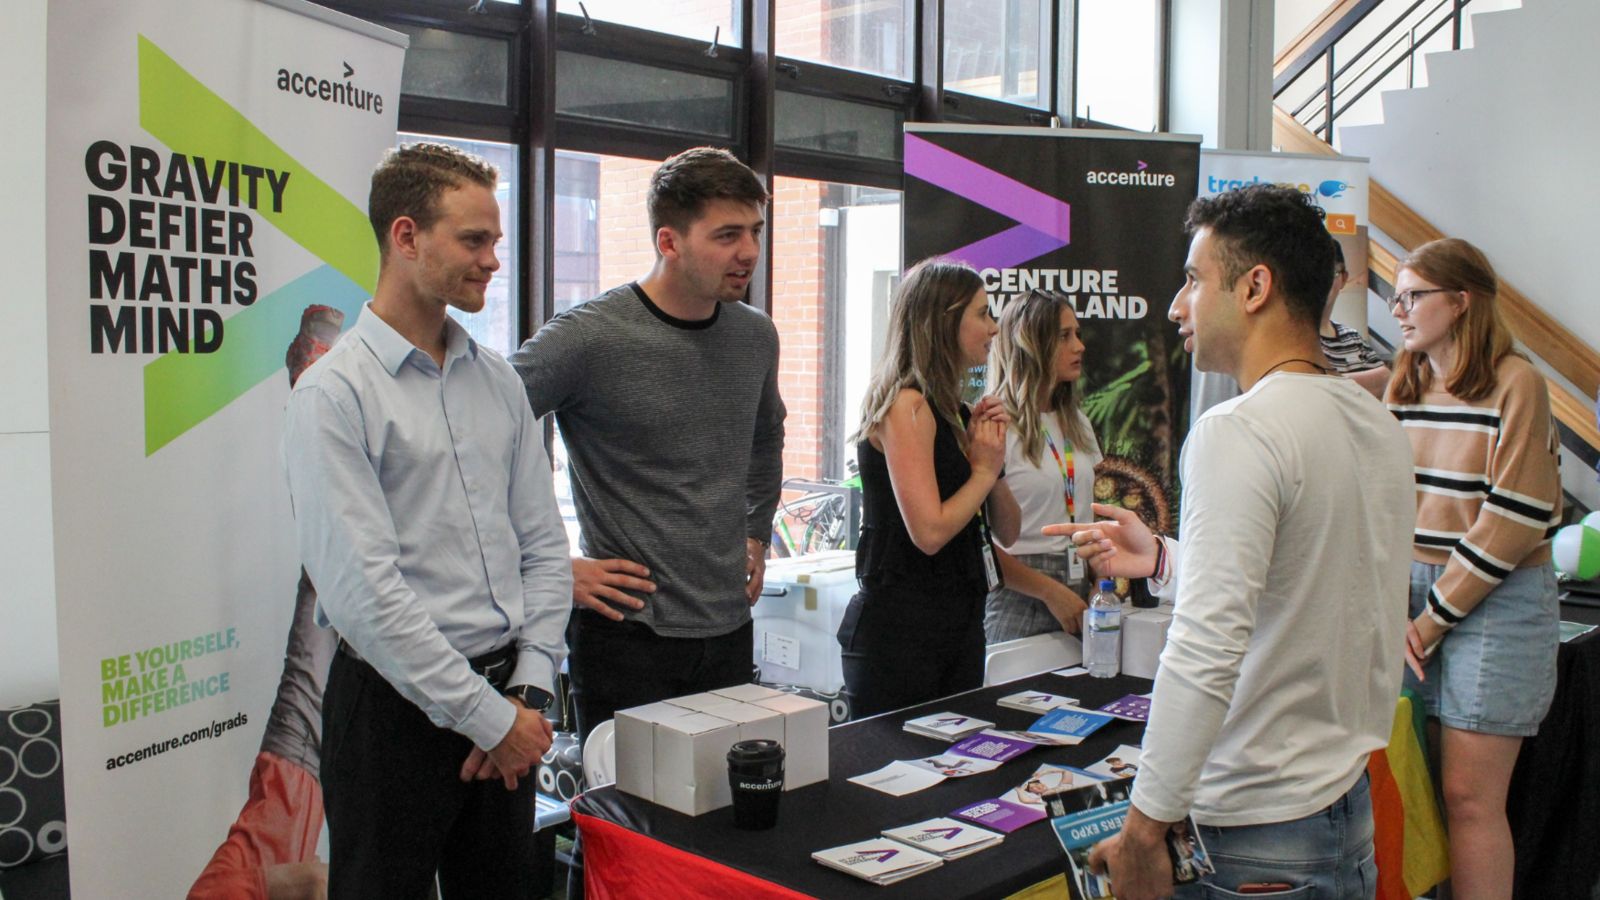 A male student engages with employers at an expo booth.